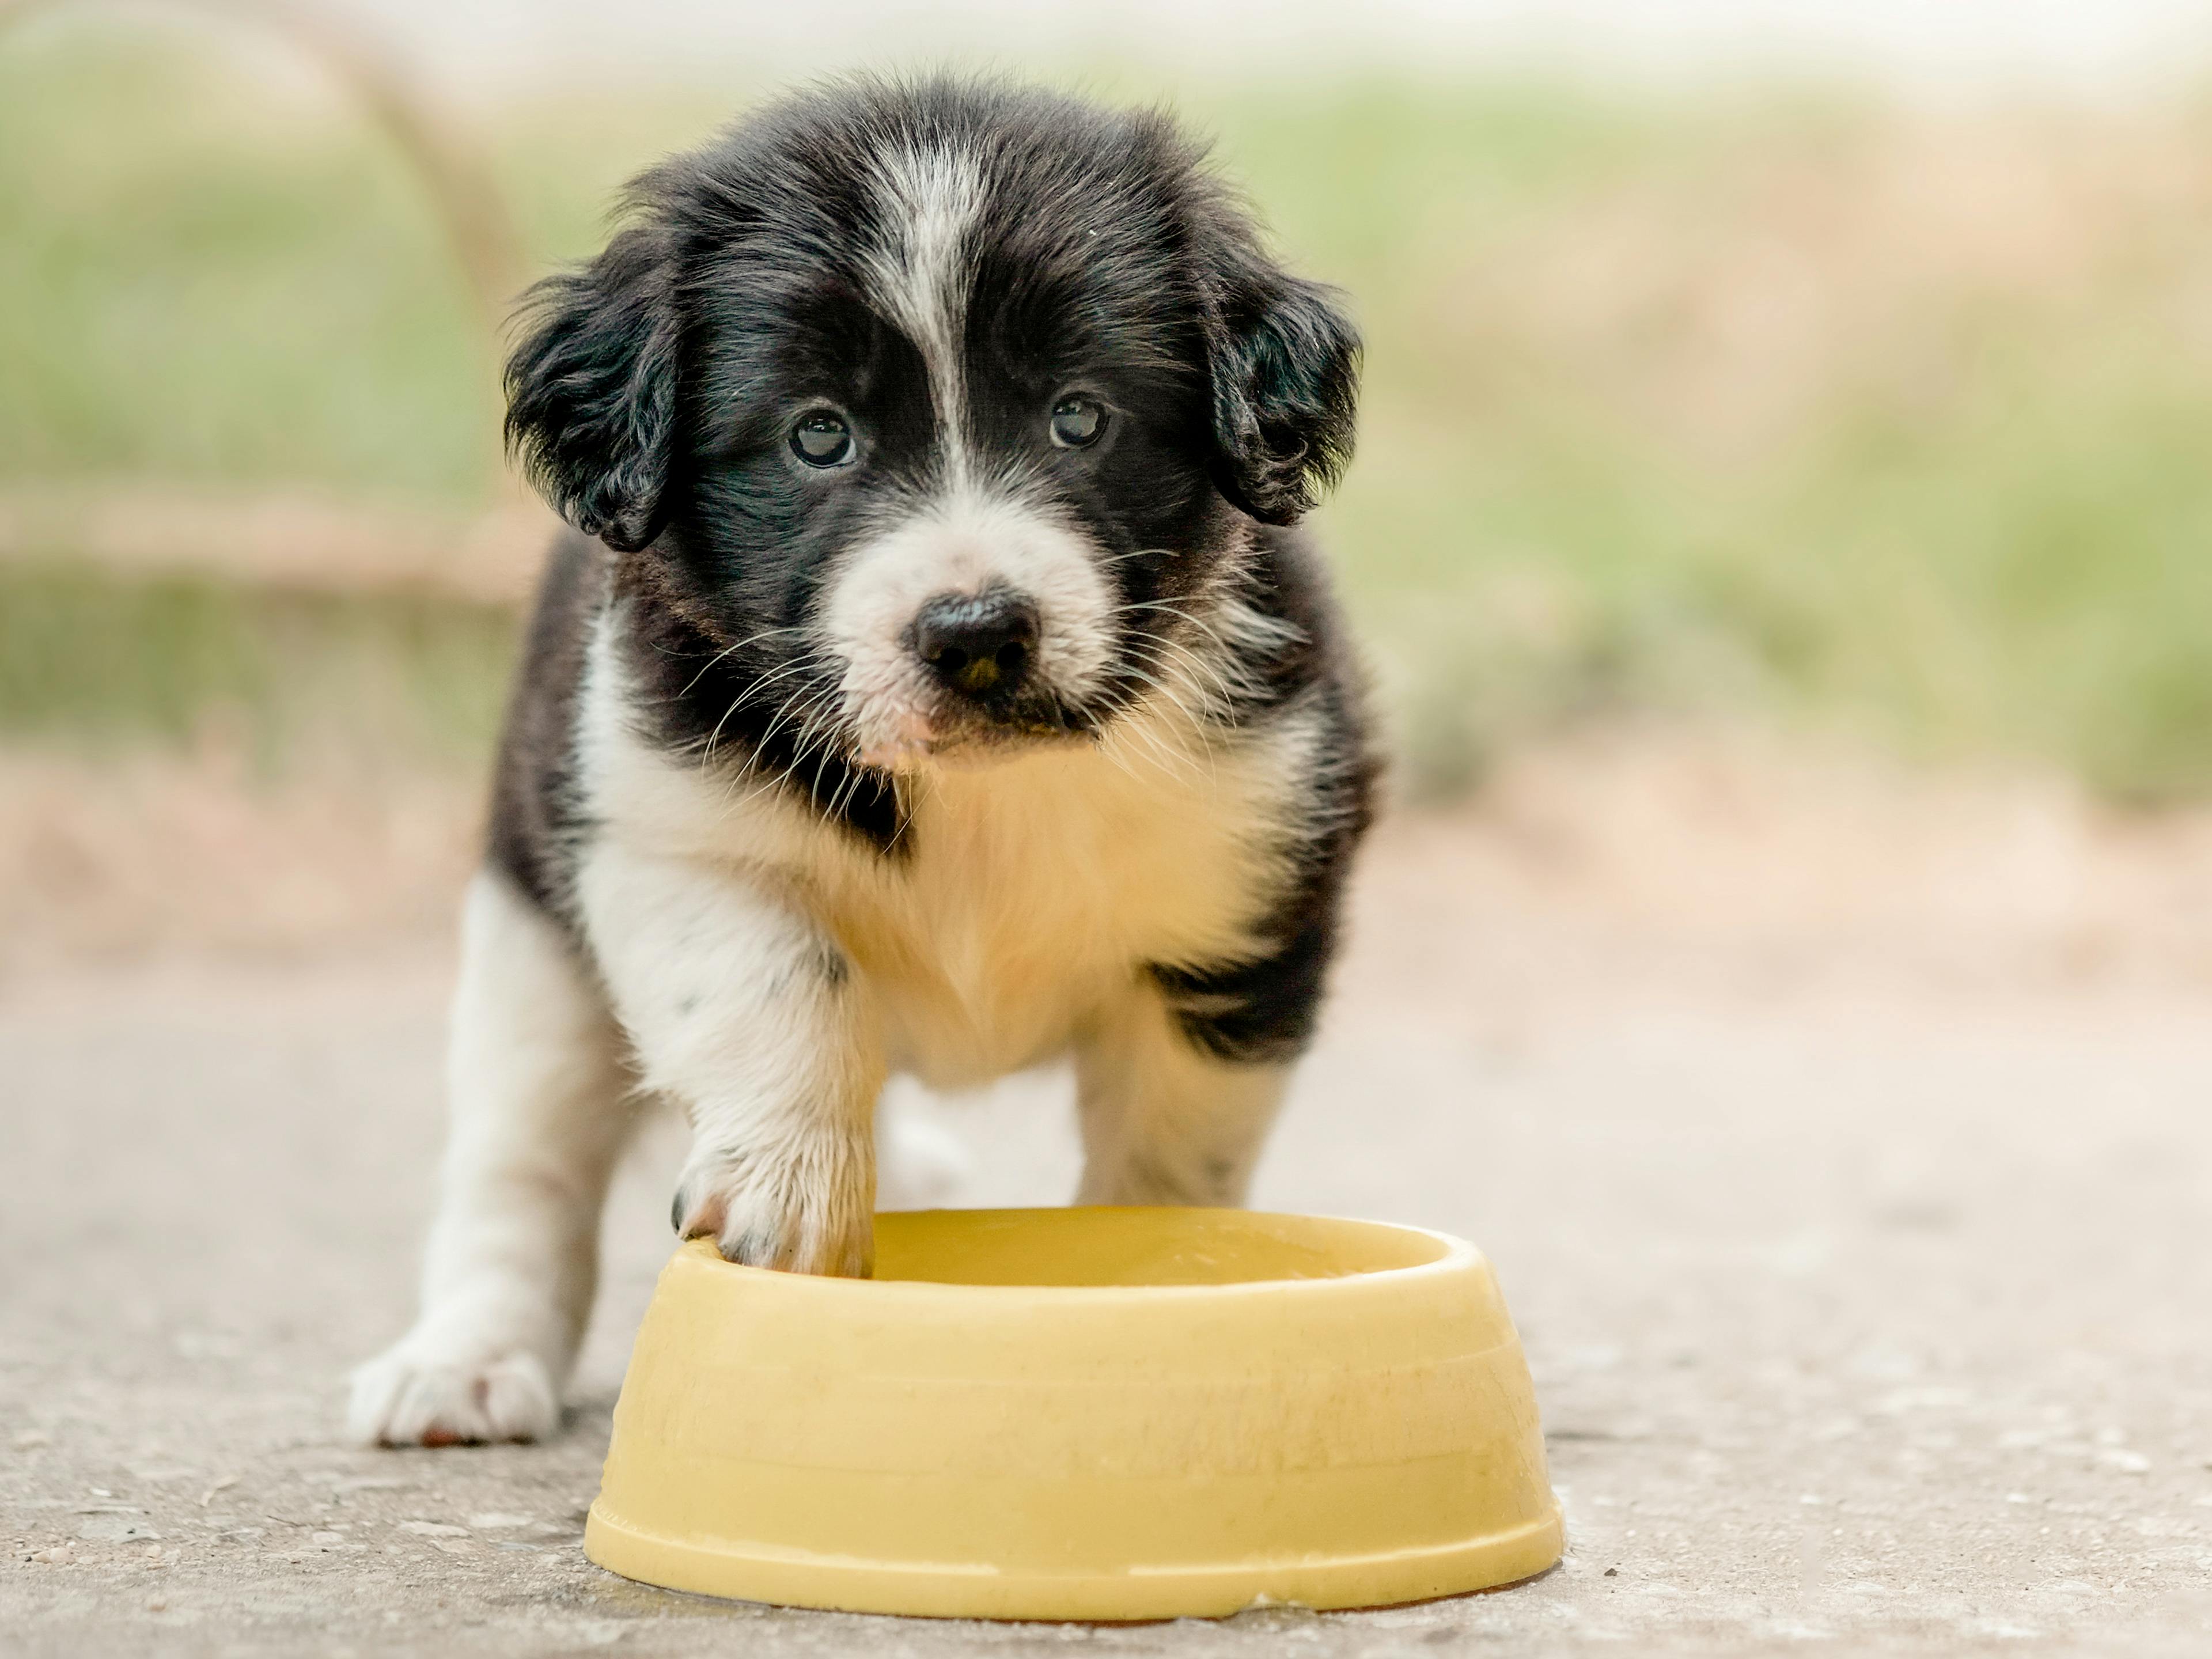 Puppy standing outdoors next to a feeding bowl